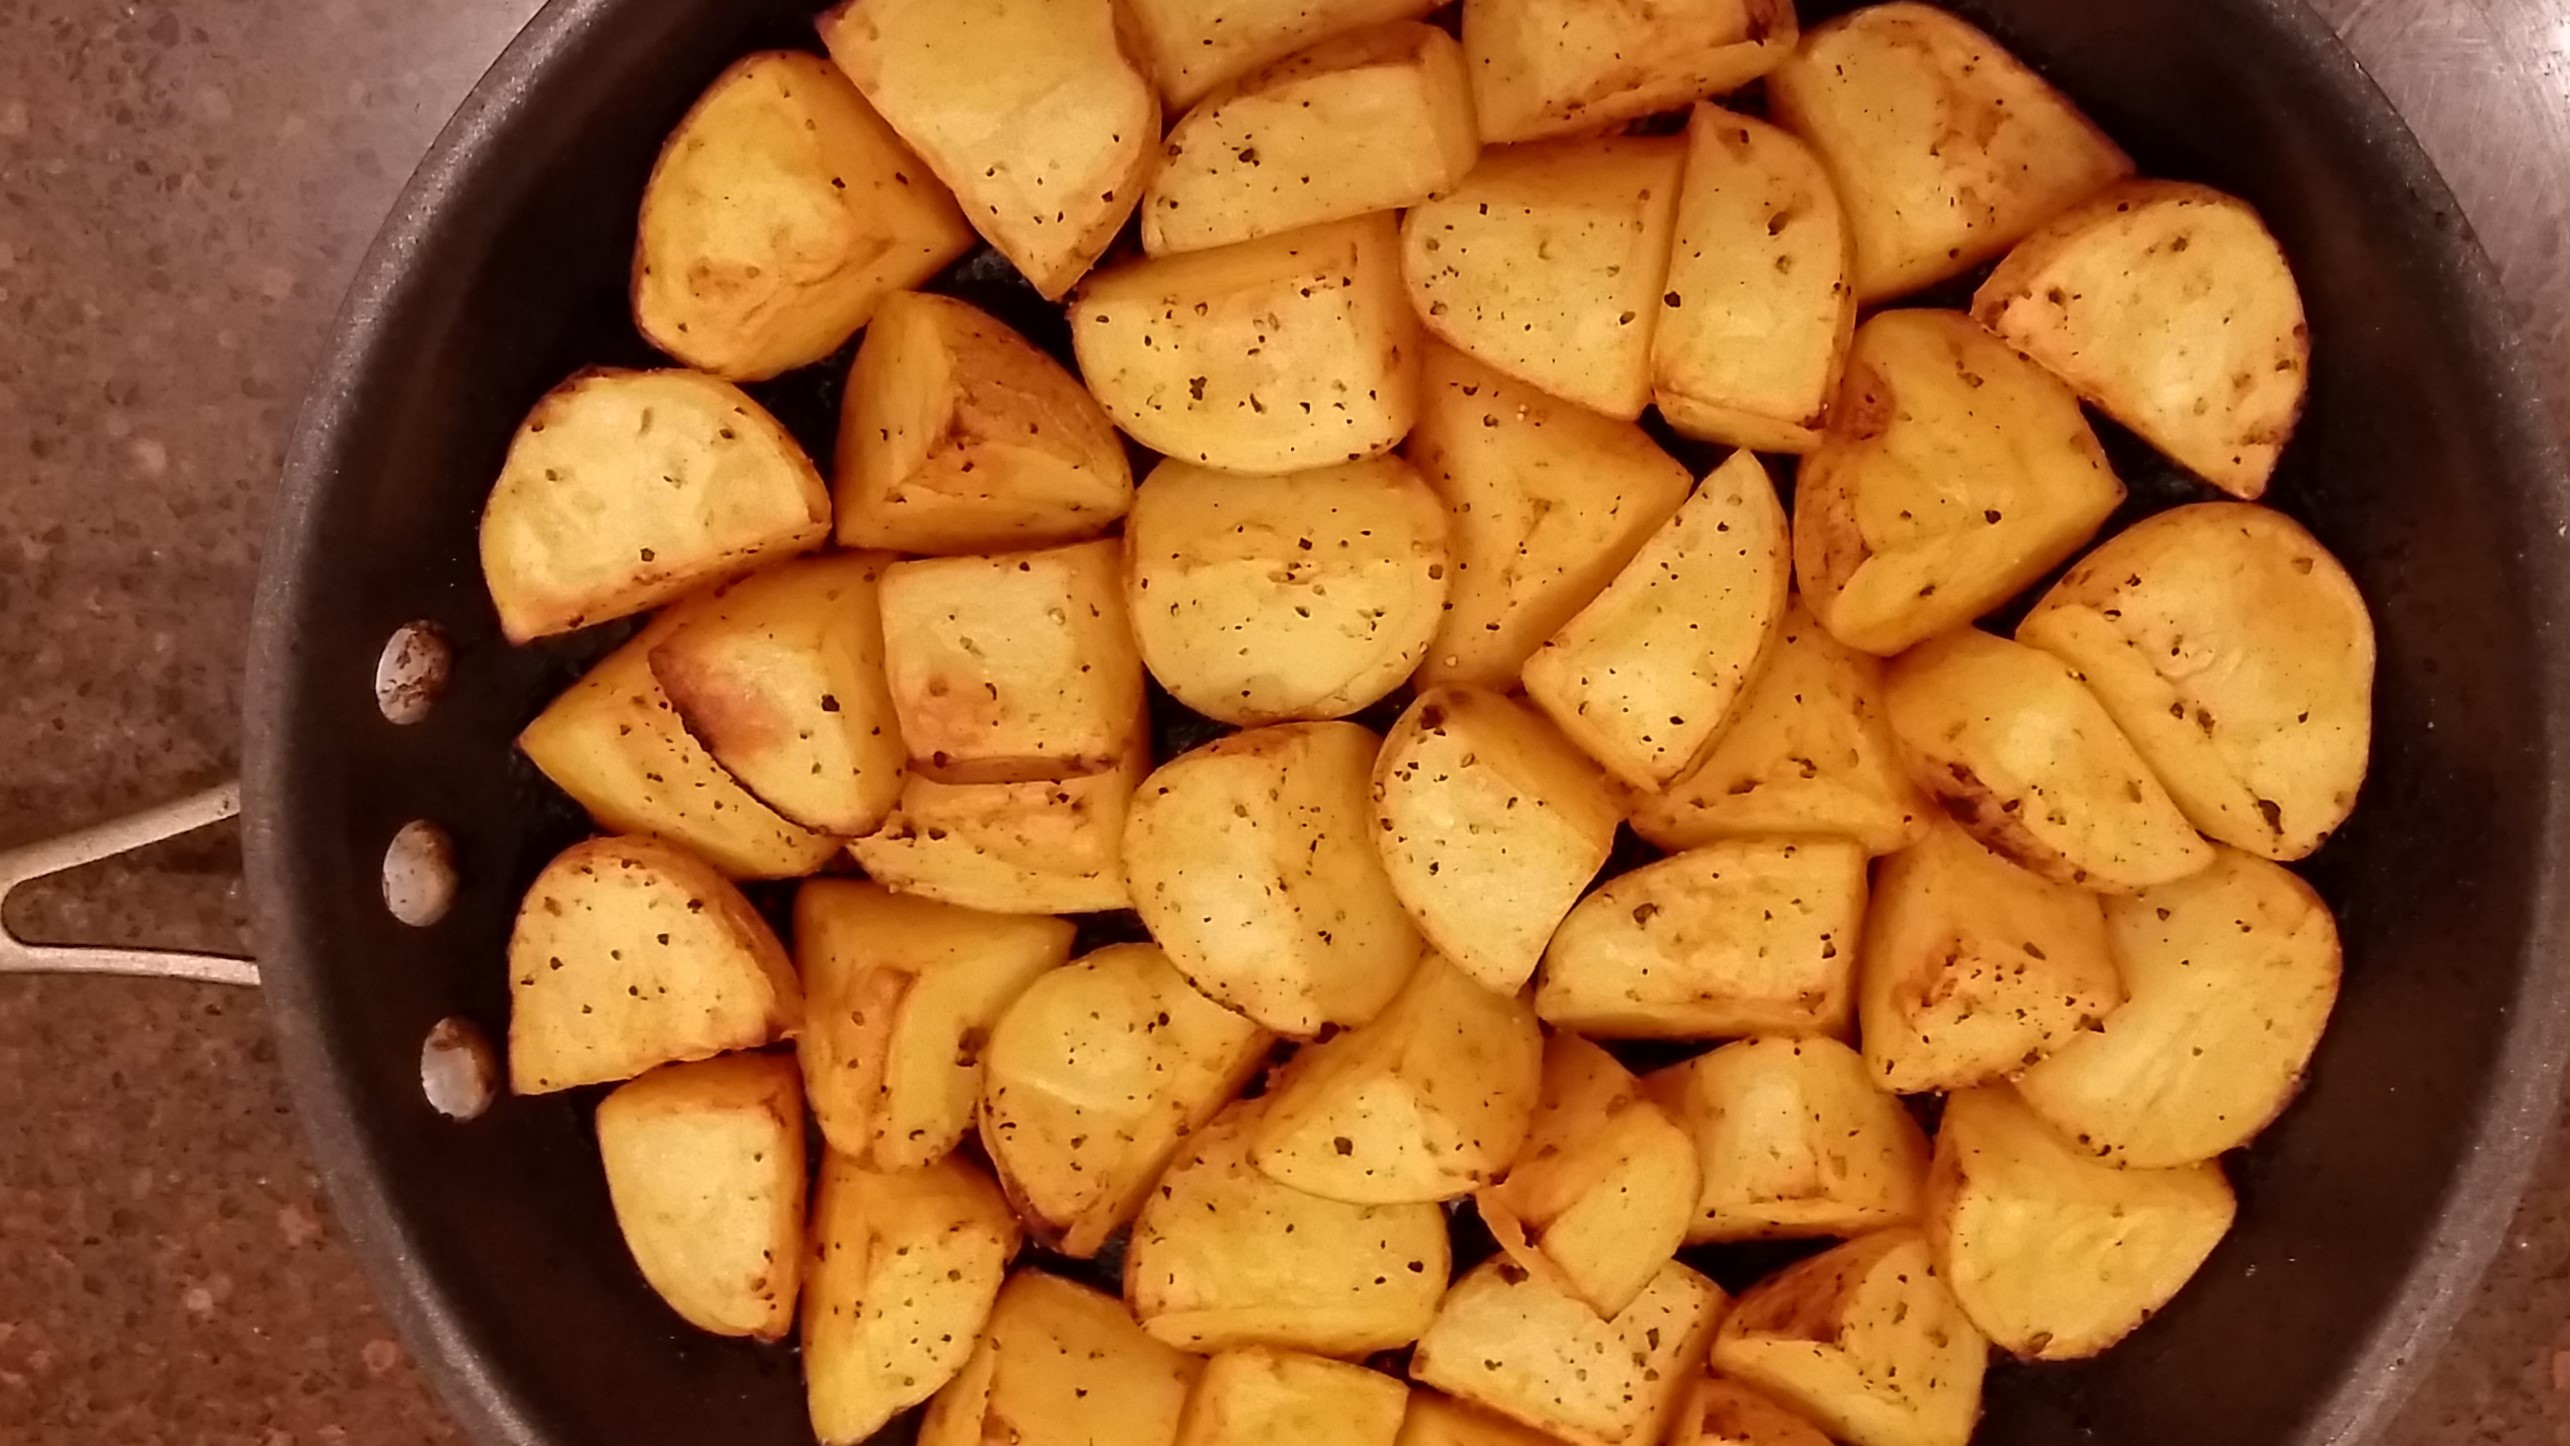 Potatoes roasted to perfection in marinade